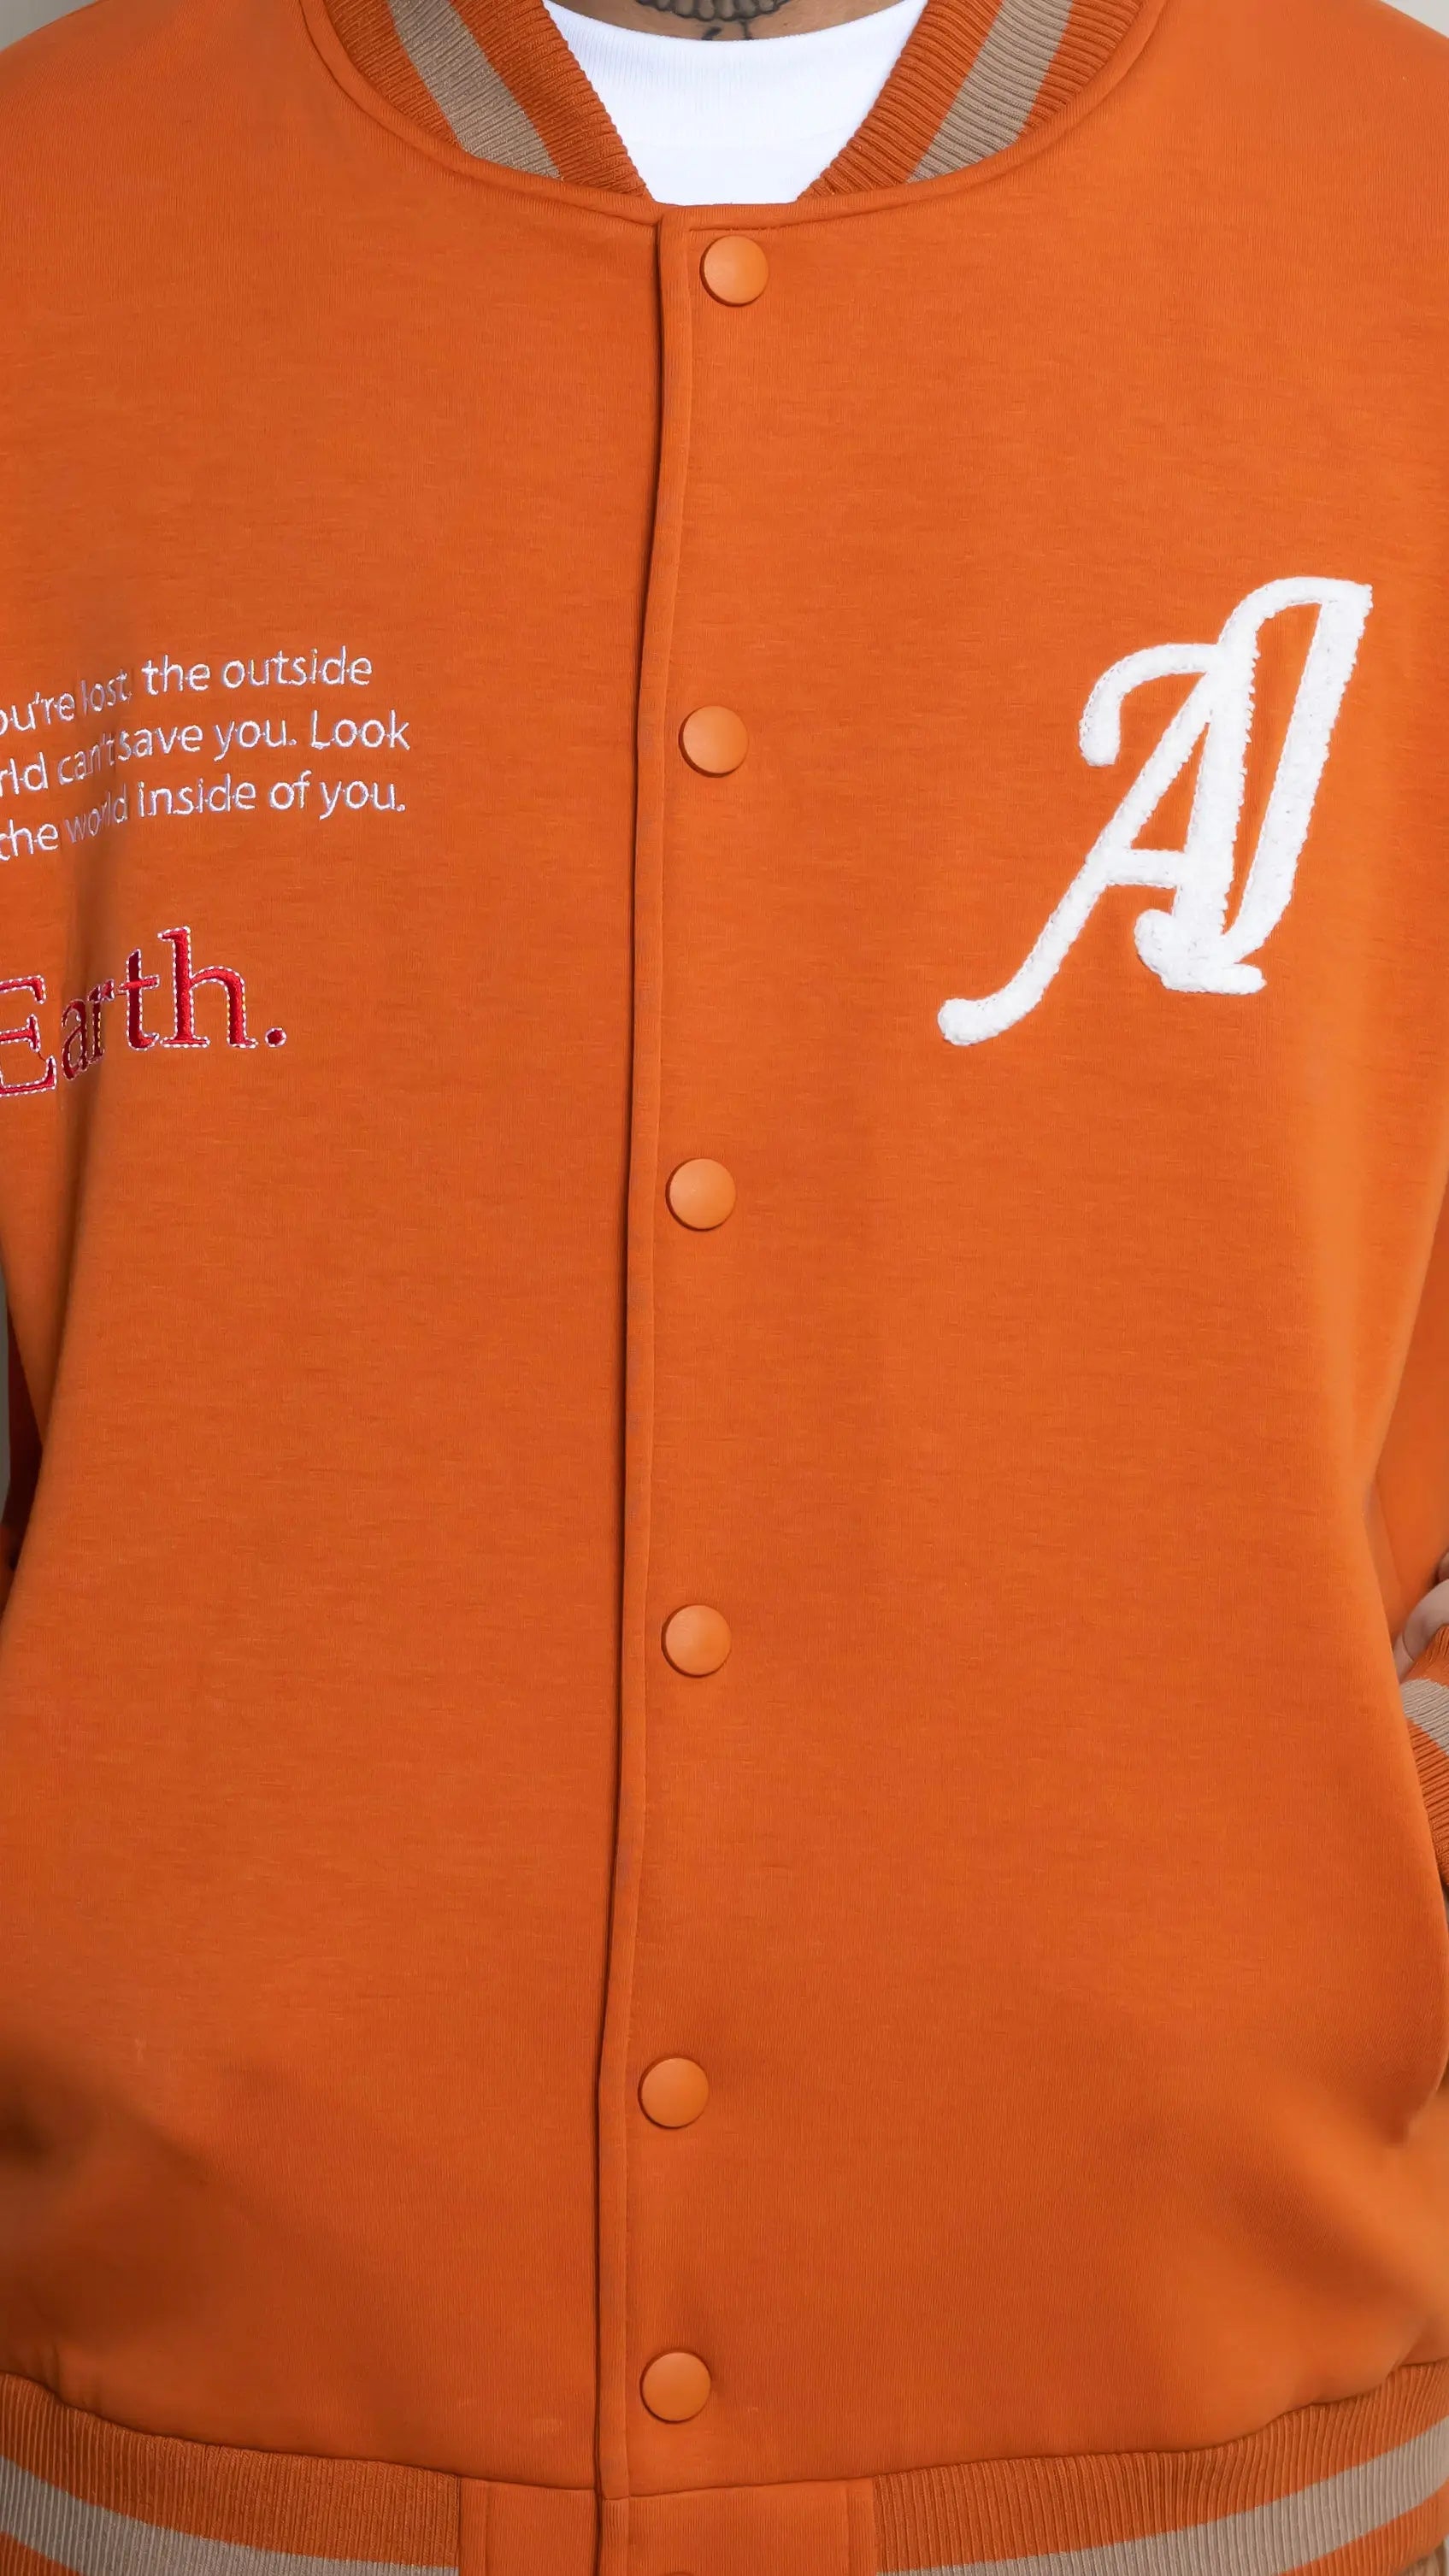 Photo of model in the Arius Juan Burnt Orange Worldly Letterman Jacket posing for product picture.